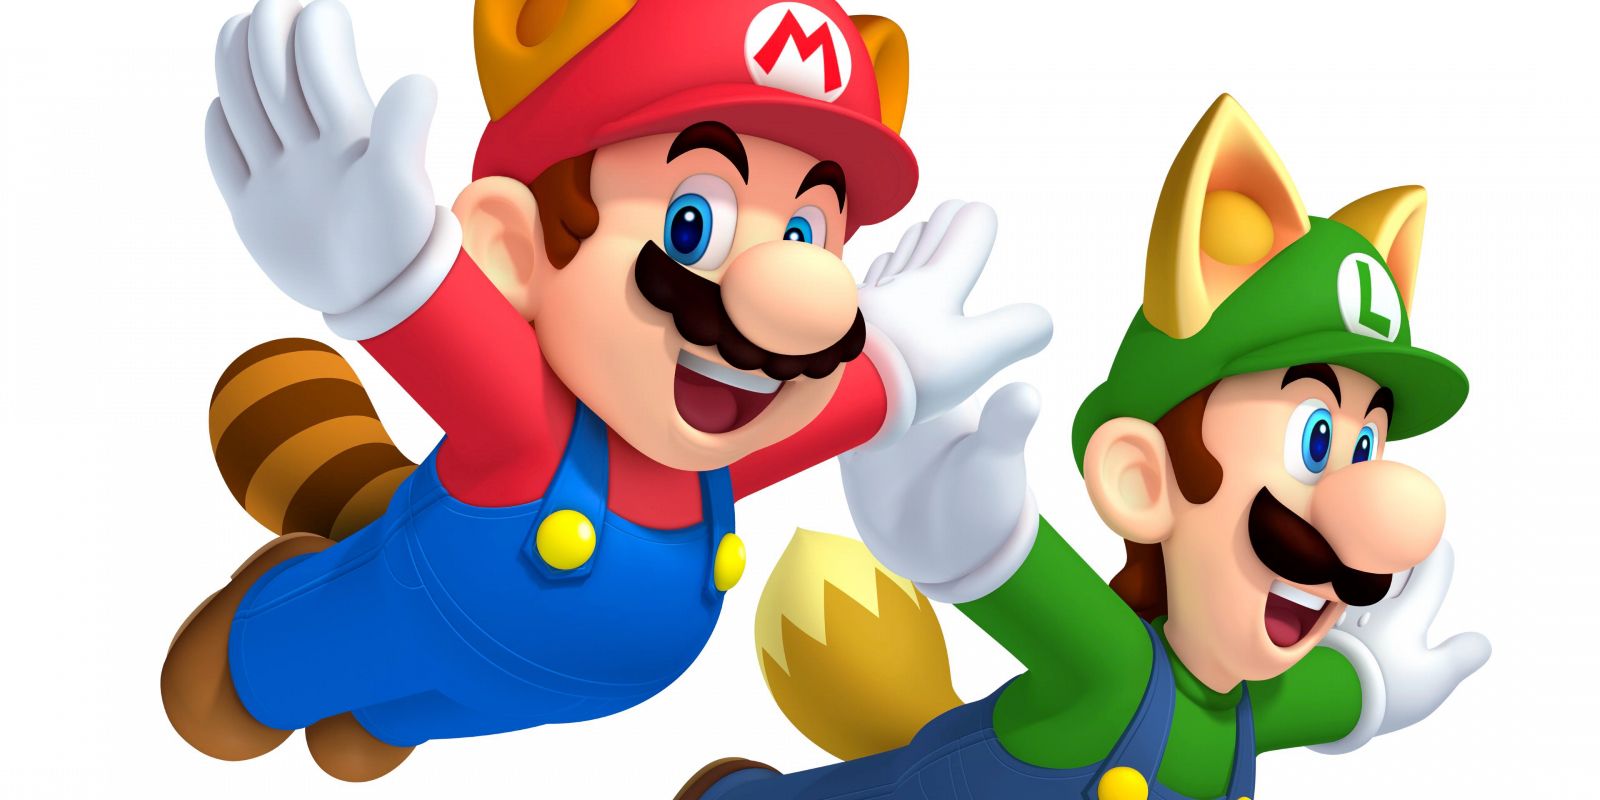 Mario and Luigi with cat ears and tails flying and laughing